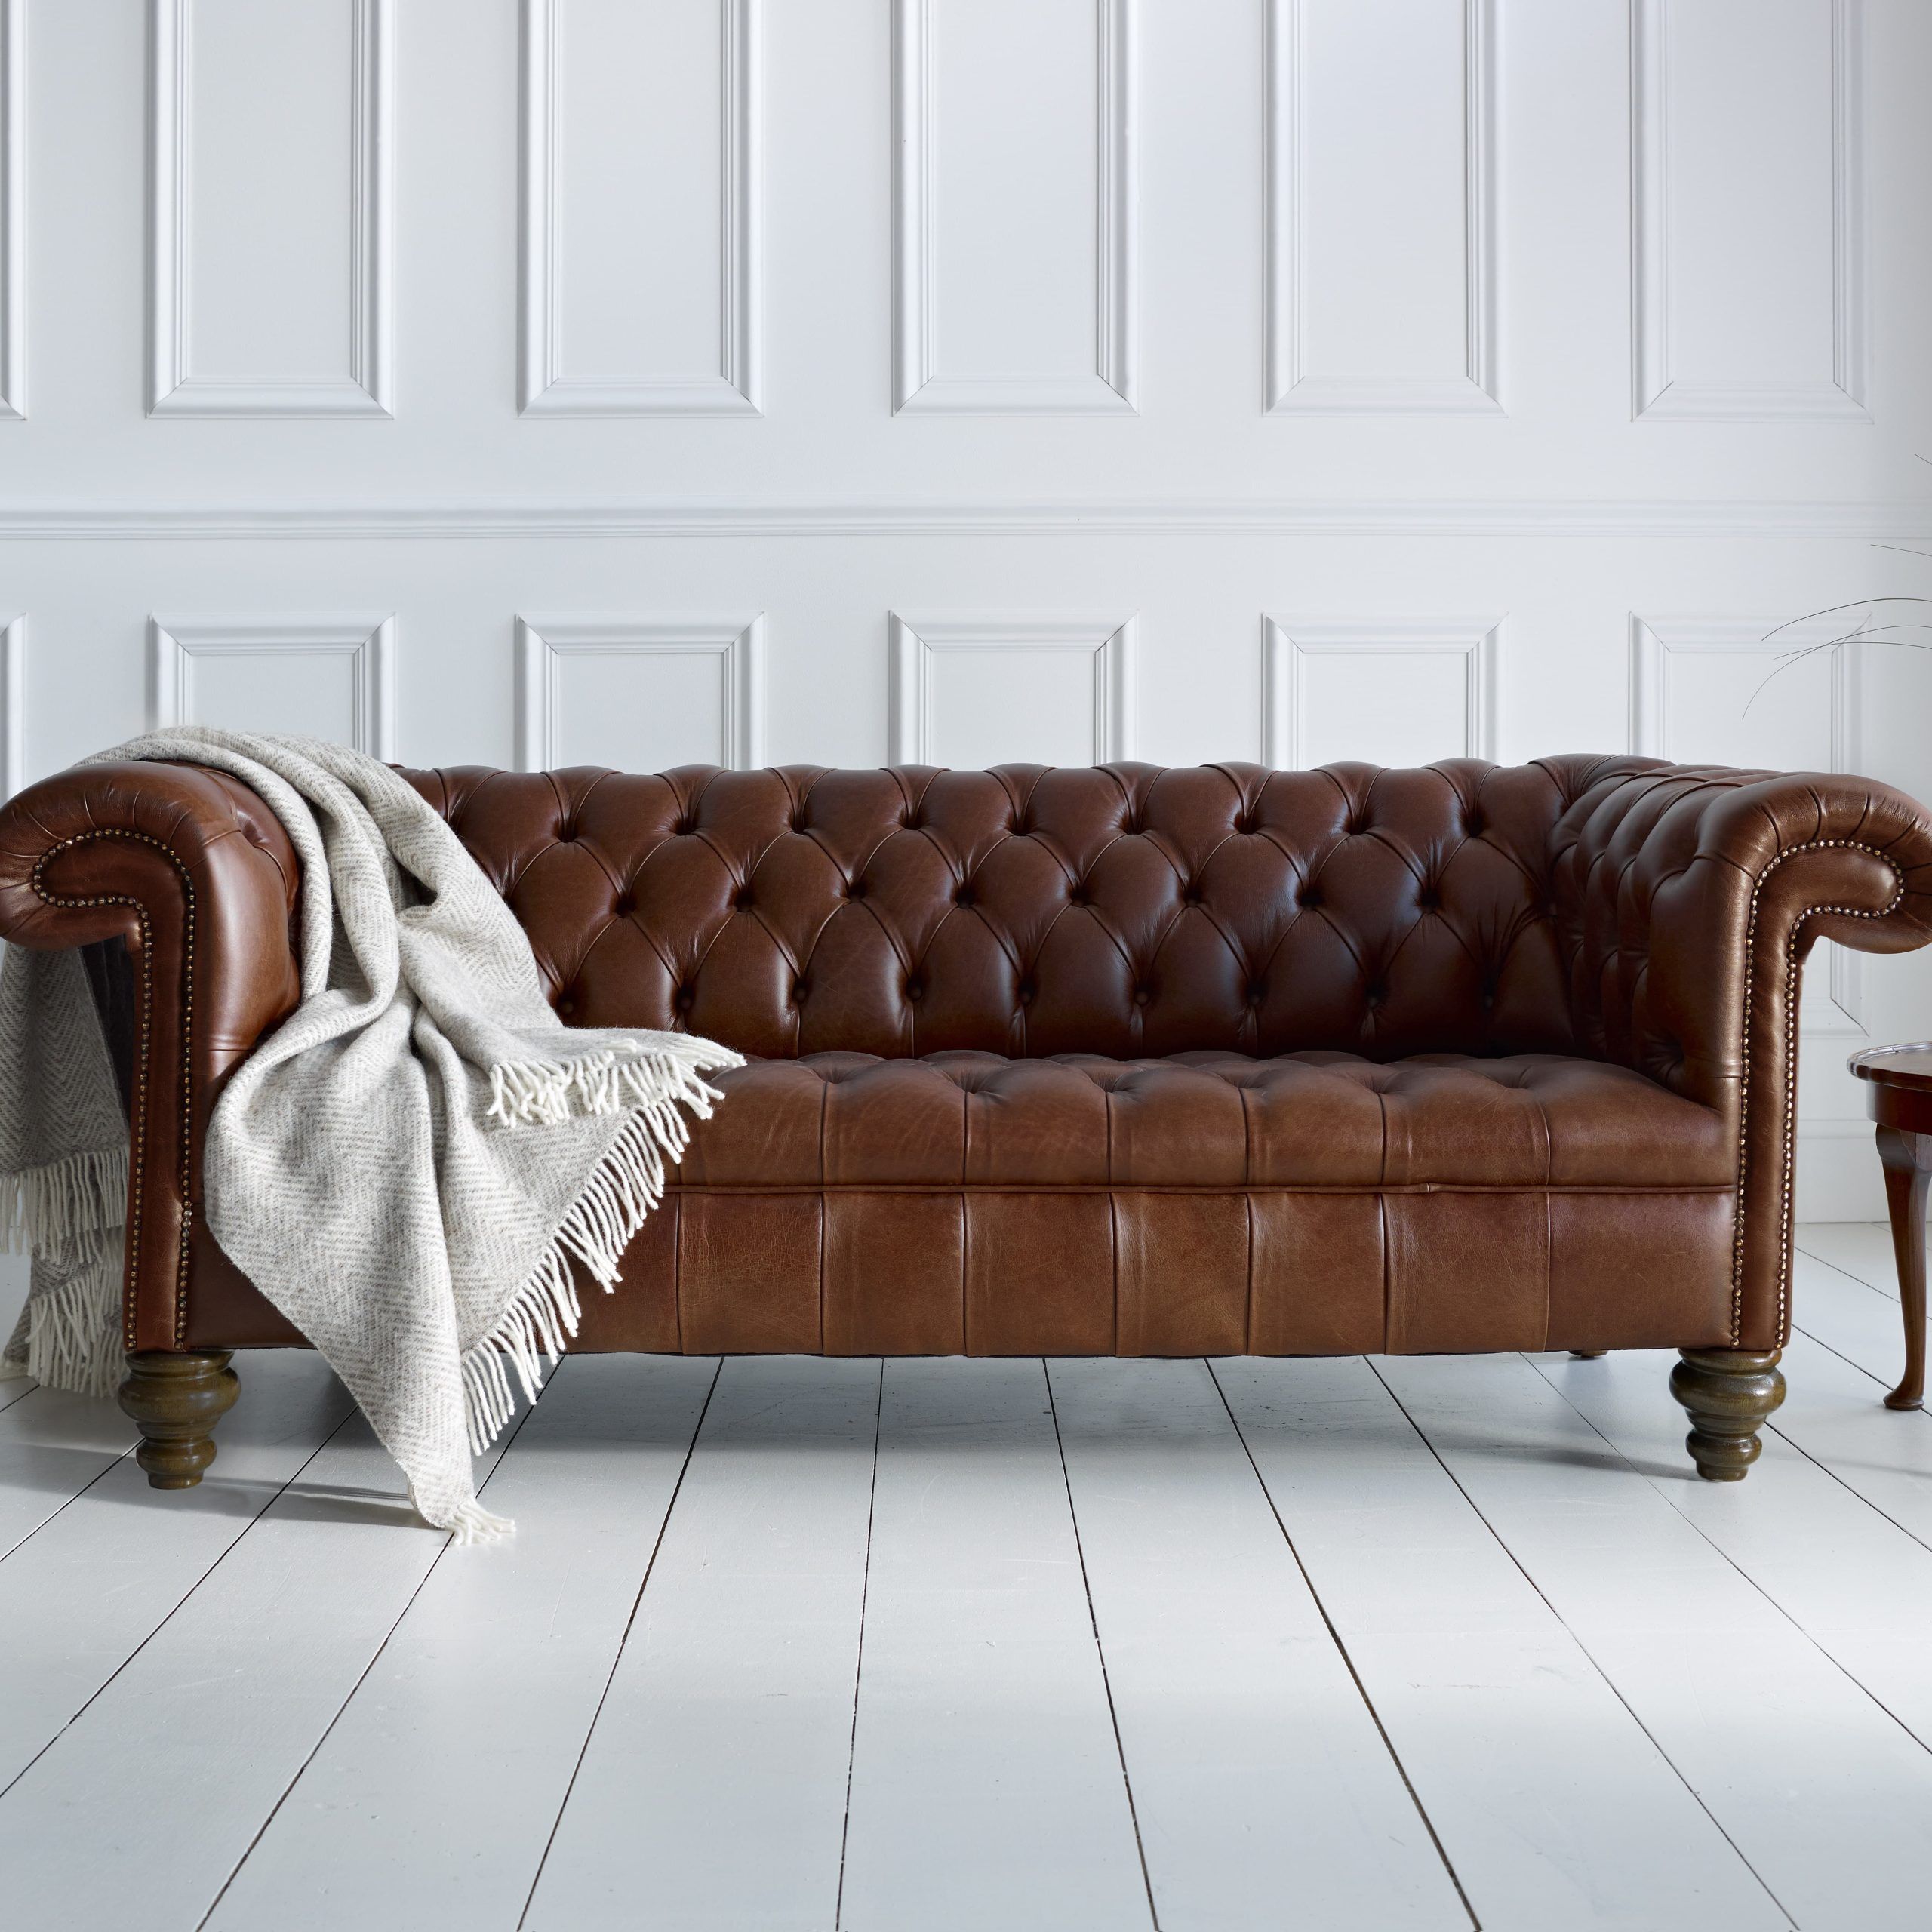 What Makes A Sofa A Chesterfield Sofa? – The Chesterfield Company For Chesterfield Sofas (View 4 of 20)